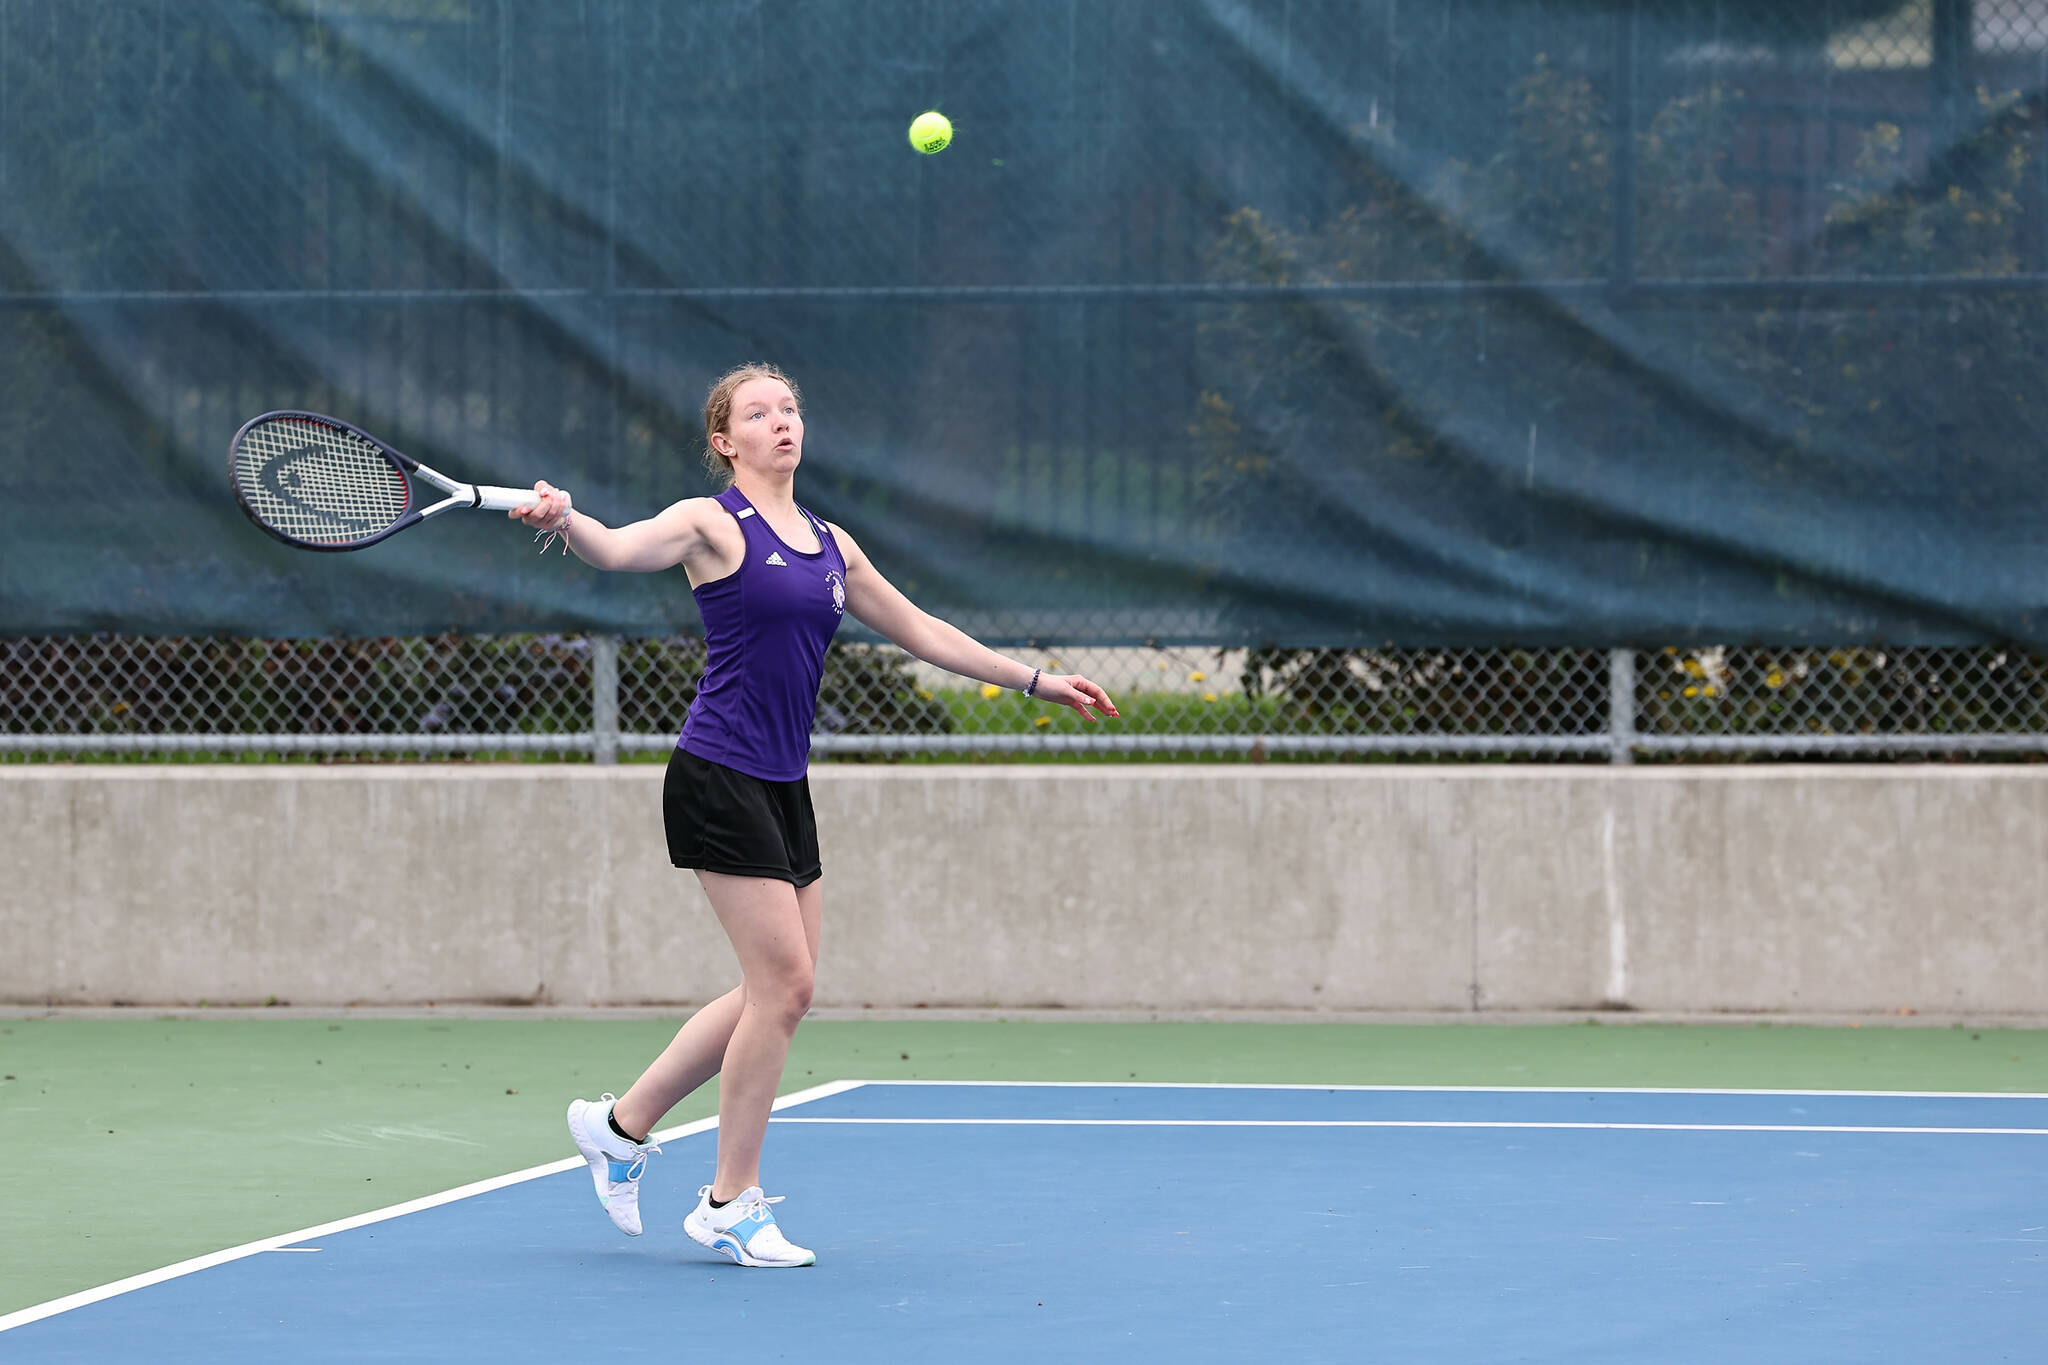 Oak Harbor athlete Anna Servatius lost fist doubles 0-6, 3-6 against Anacortes May 1. The Wildcats lost the match 3-4. (Photo by John Fisken)